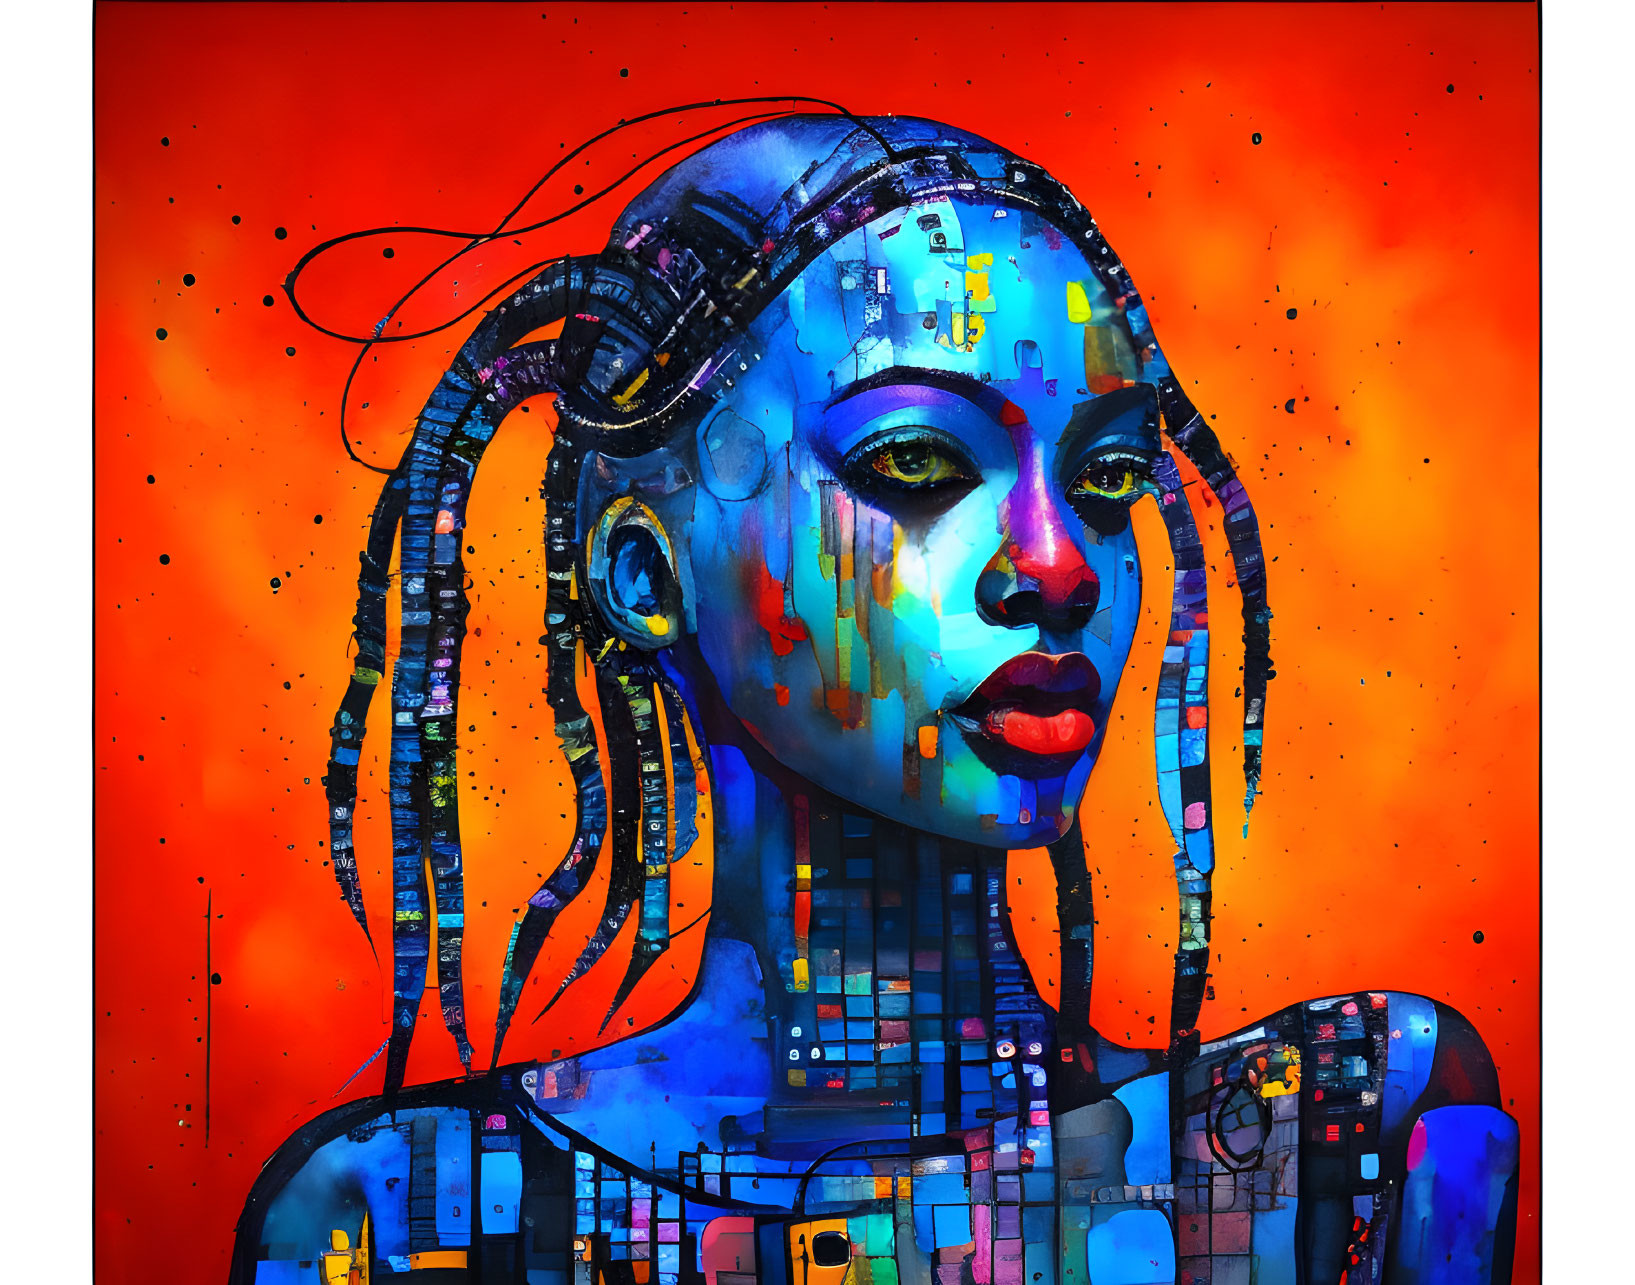 Futuristic cyberpunk portrait of a woman with blue skin and circuit patterns